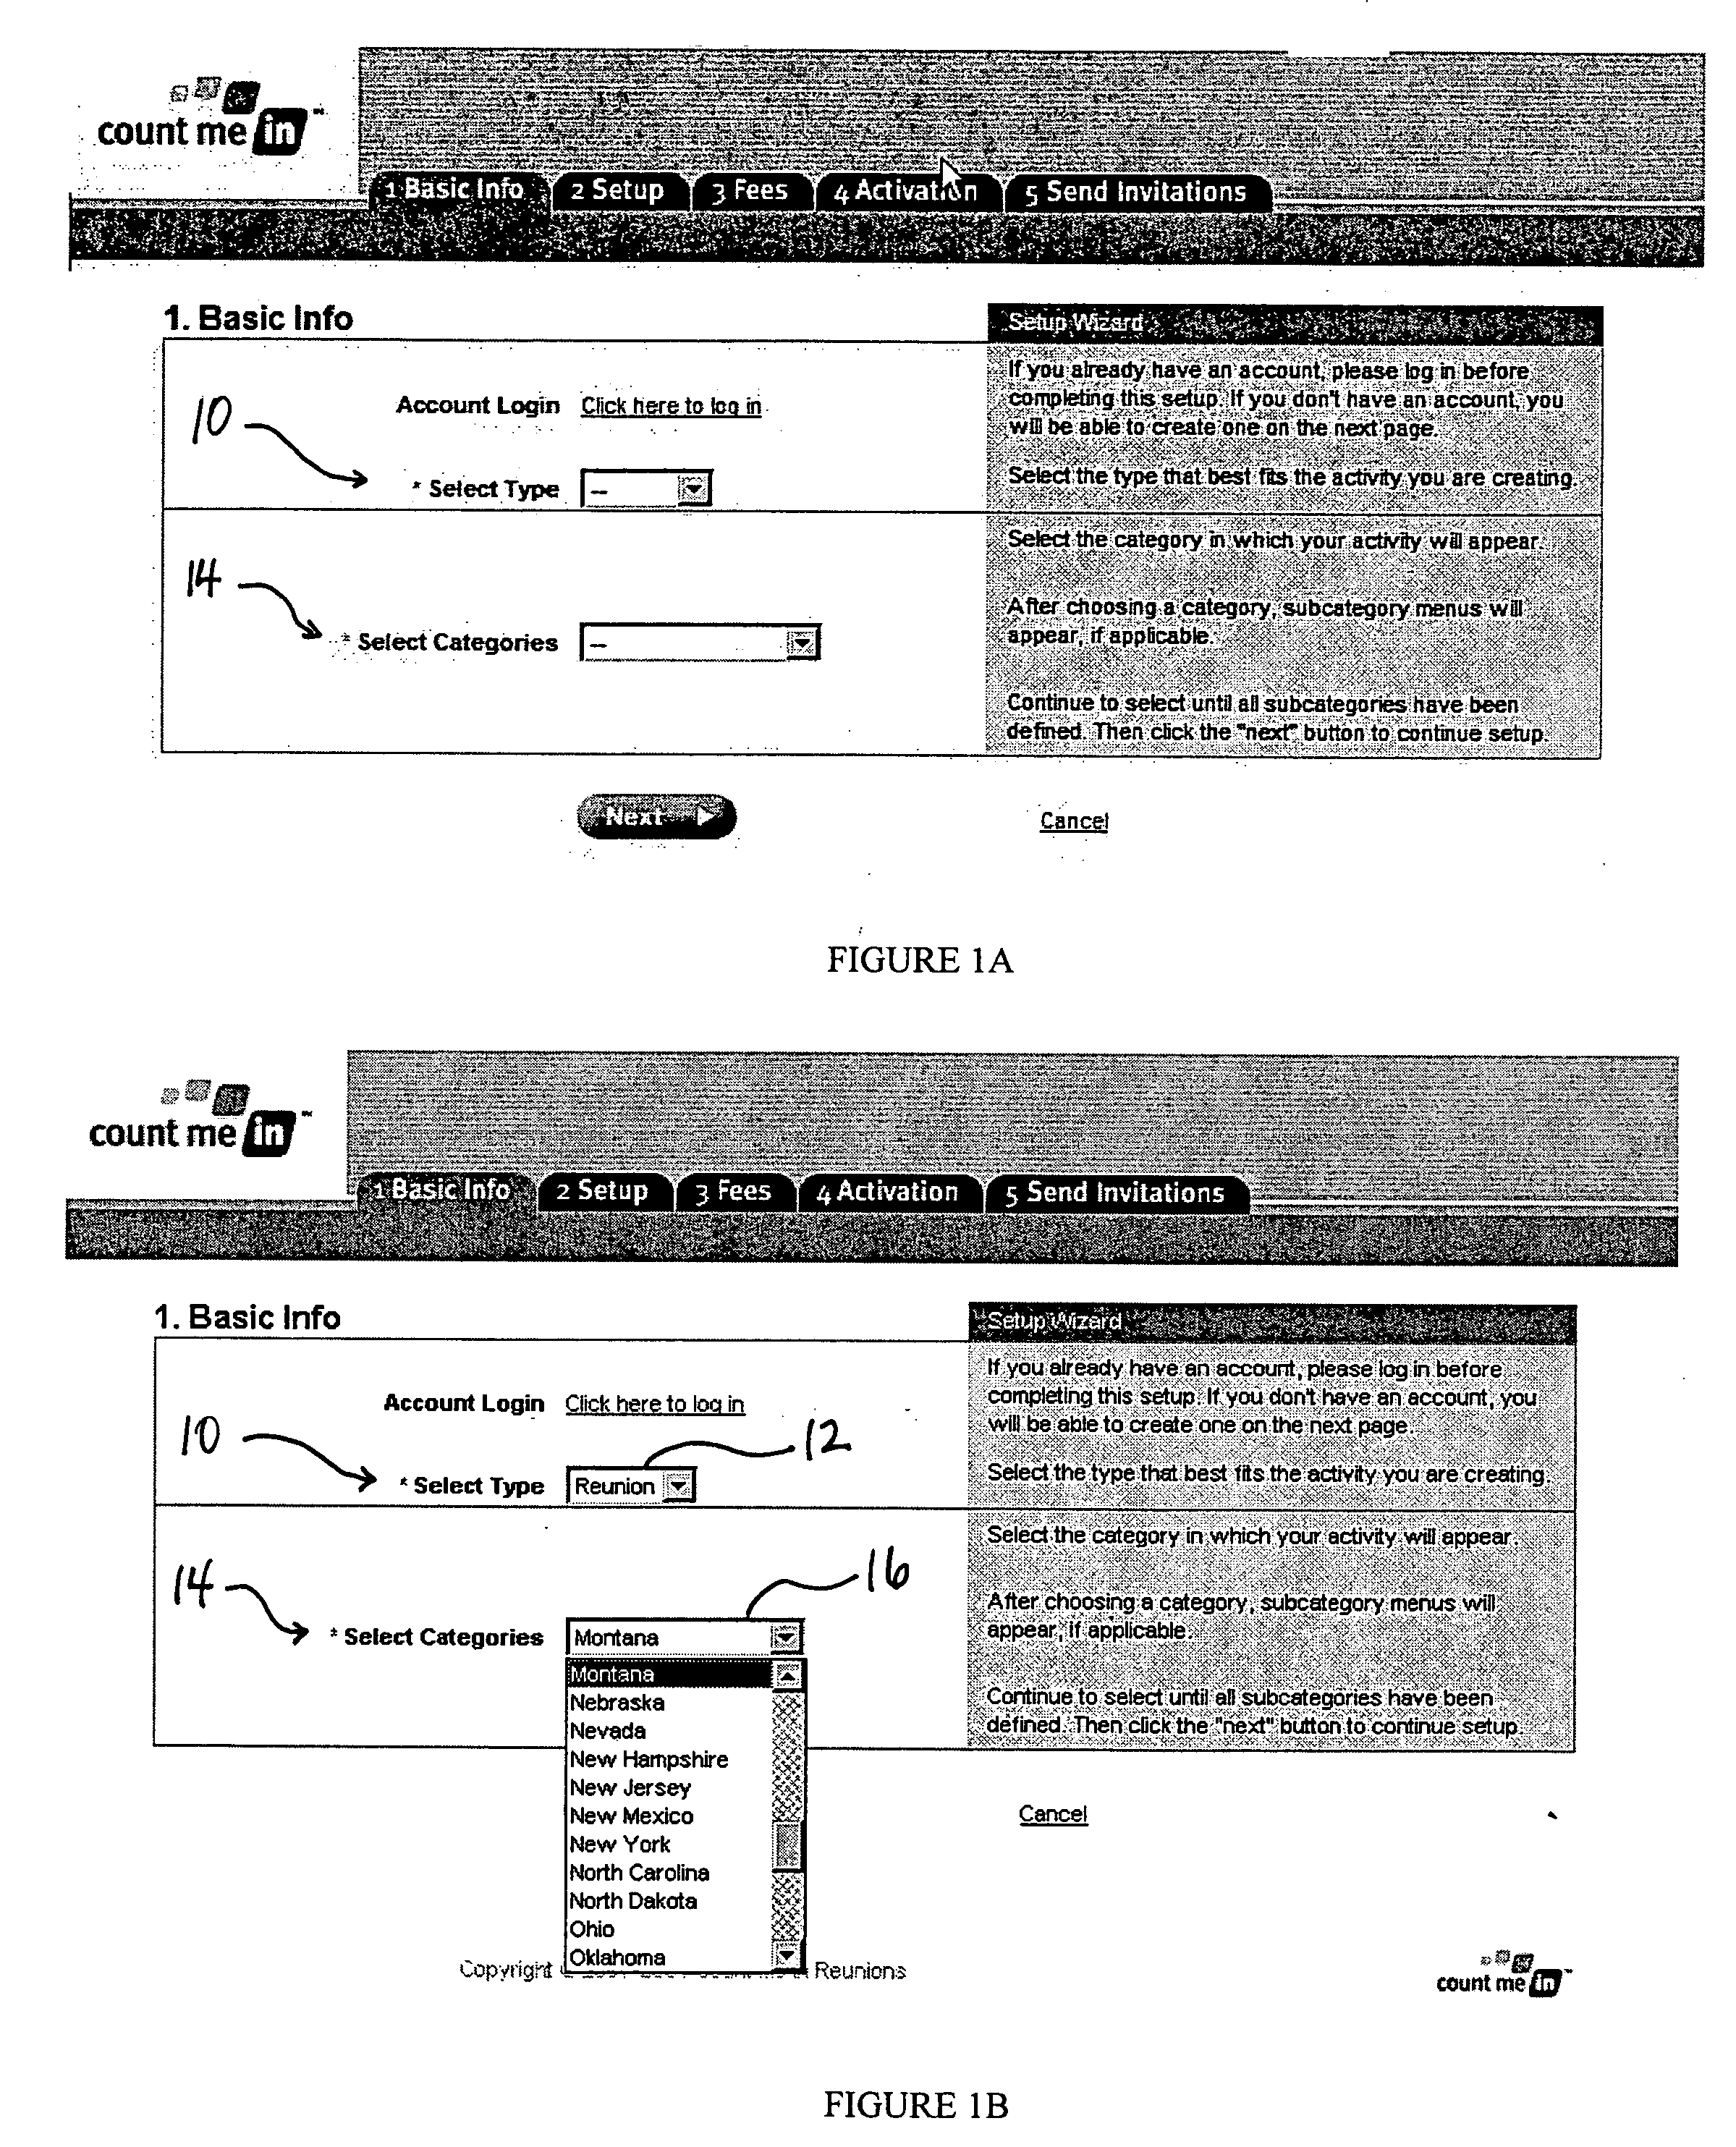 Automated real-time event planning system and method